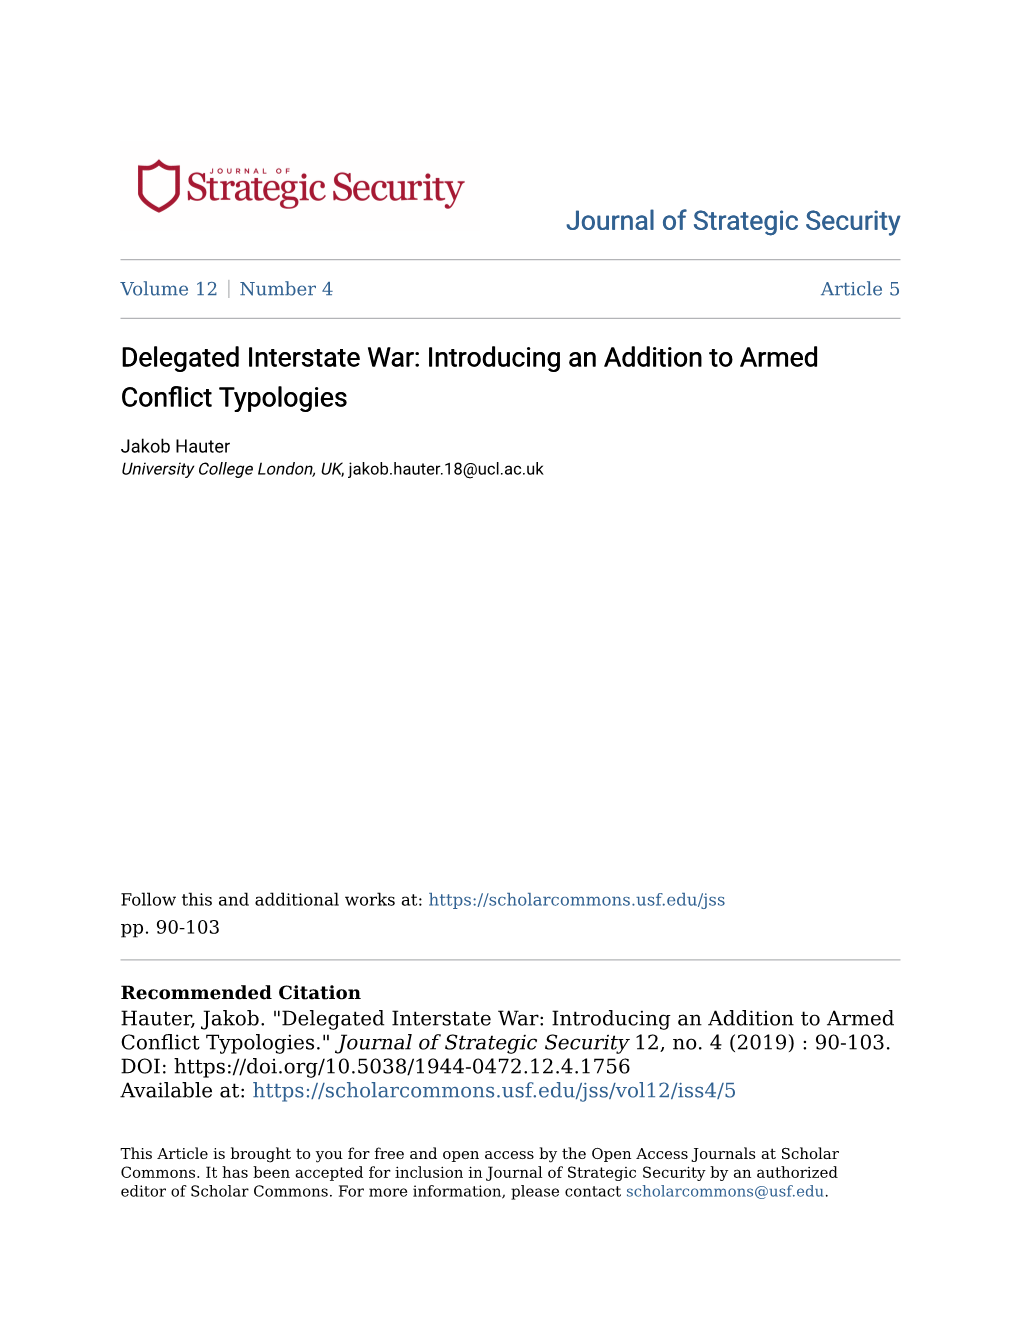 Delegated Interstate War: Introducing an Addition to Armed Conflict Ypologiest